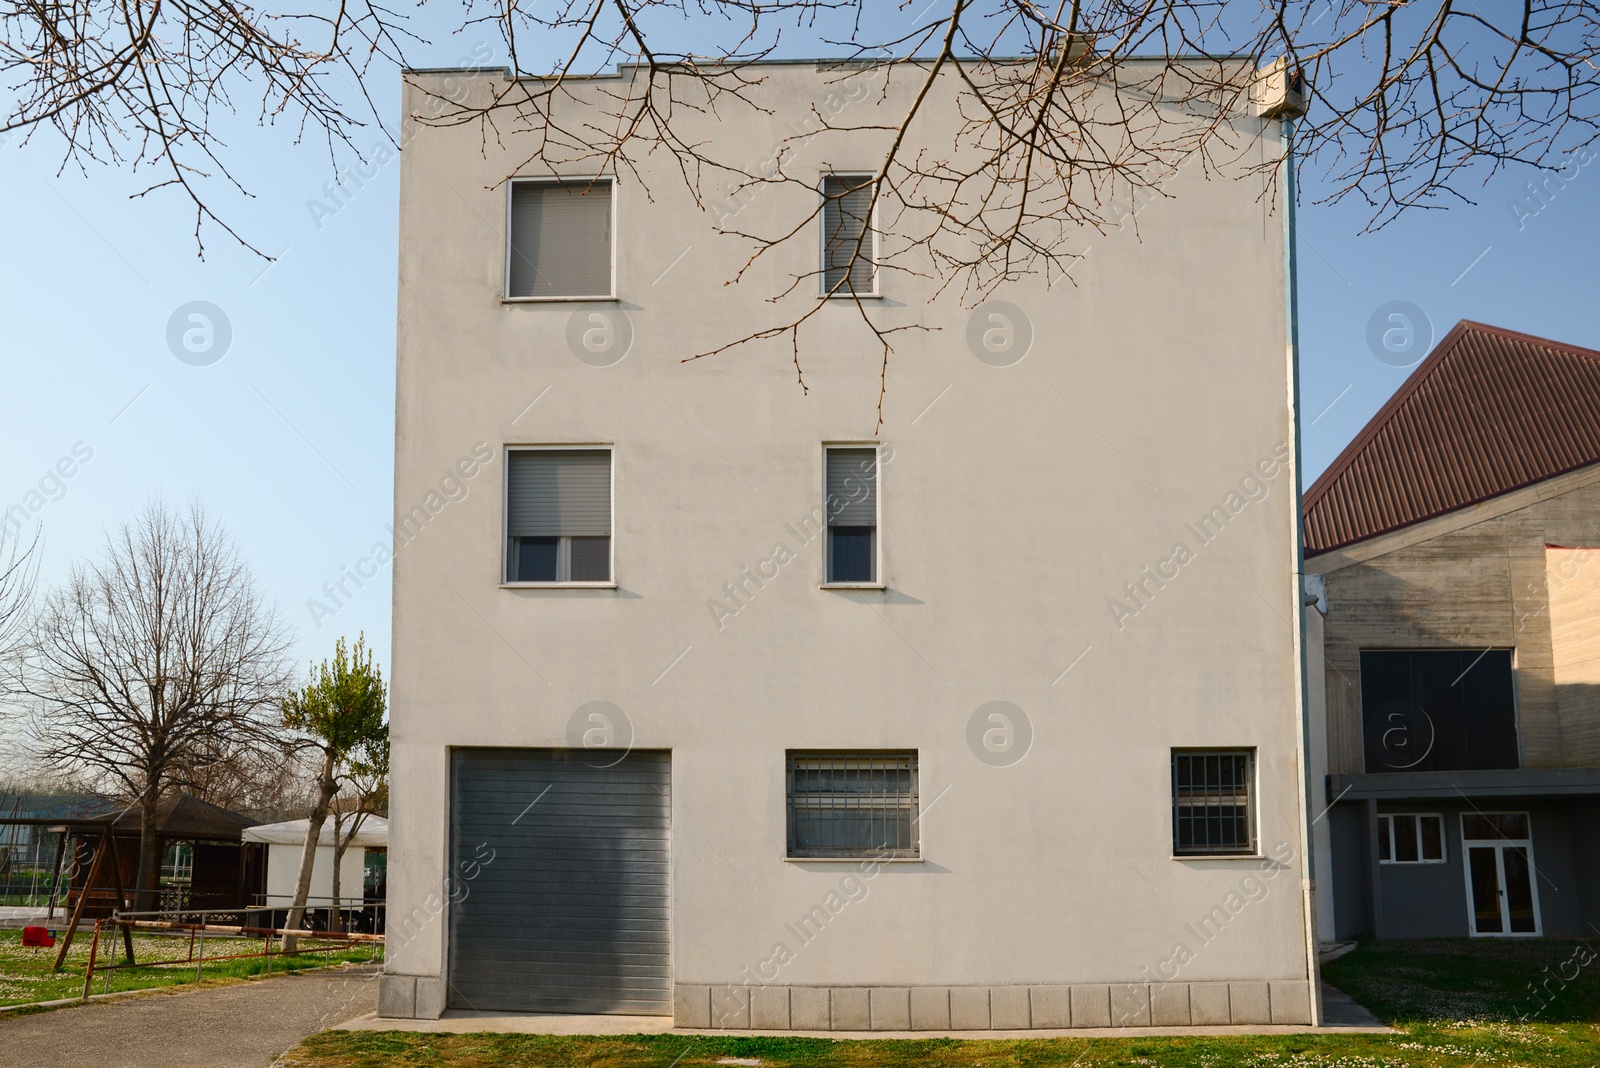 Photo of Simple white building exterior on sunny day